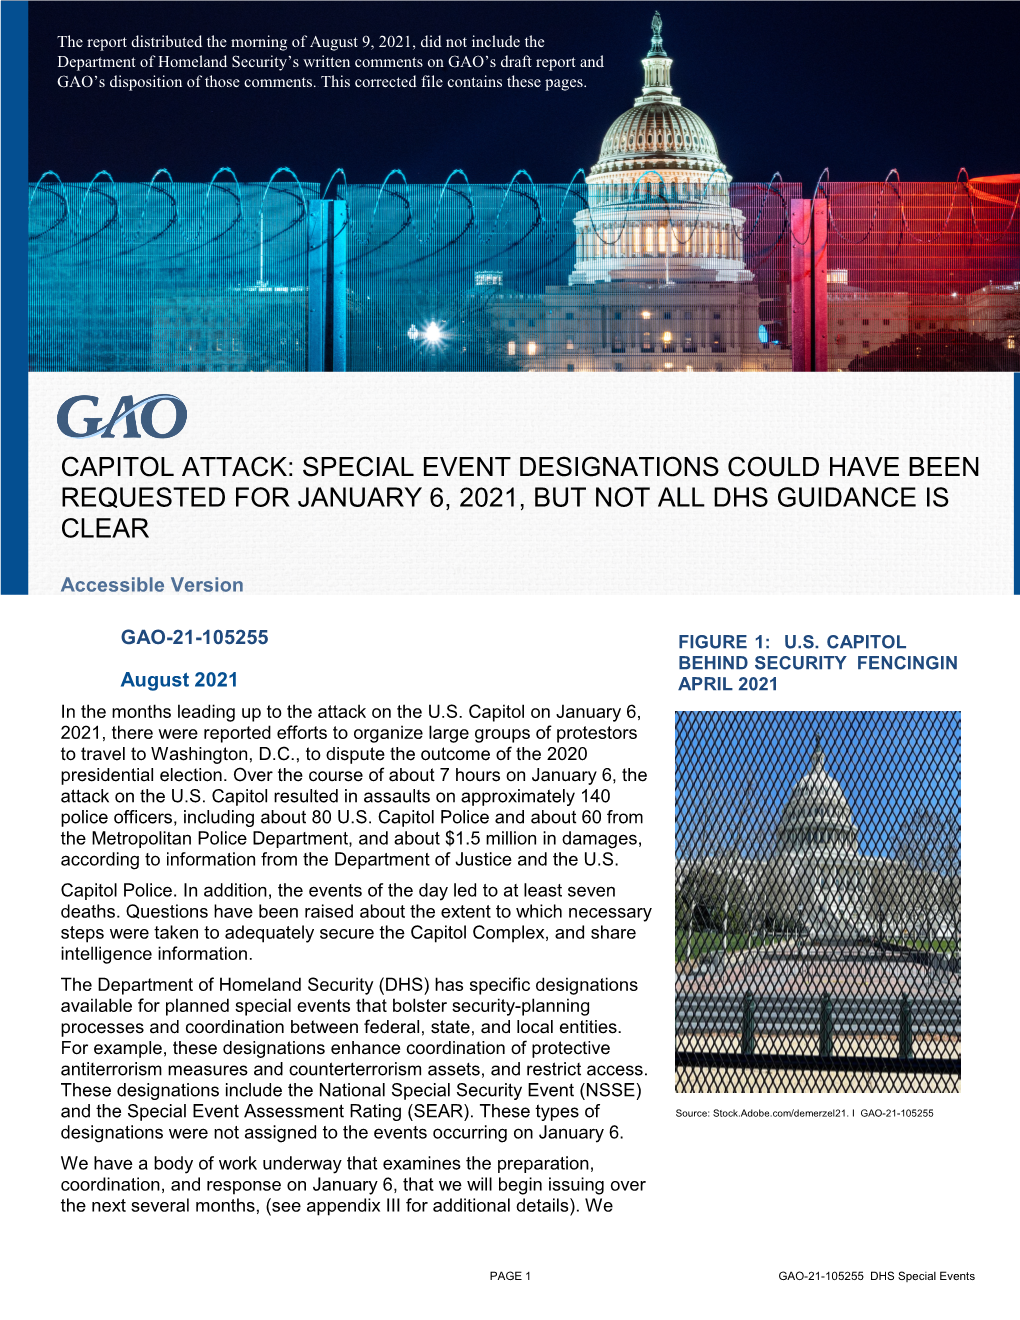 GAO-21-105255, Accessible Version, CAPITOL ATTACK: SPECIAL